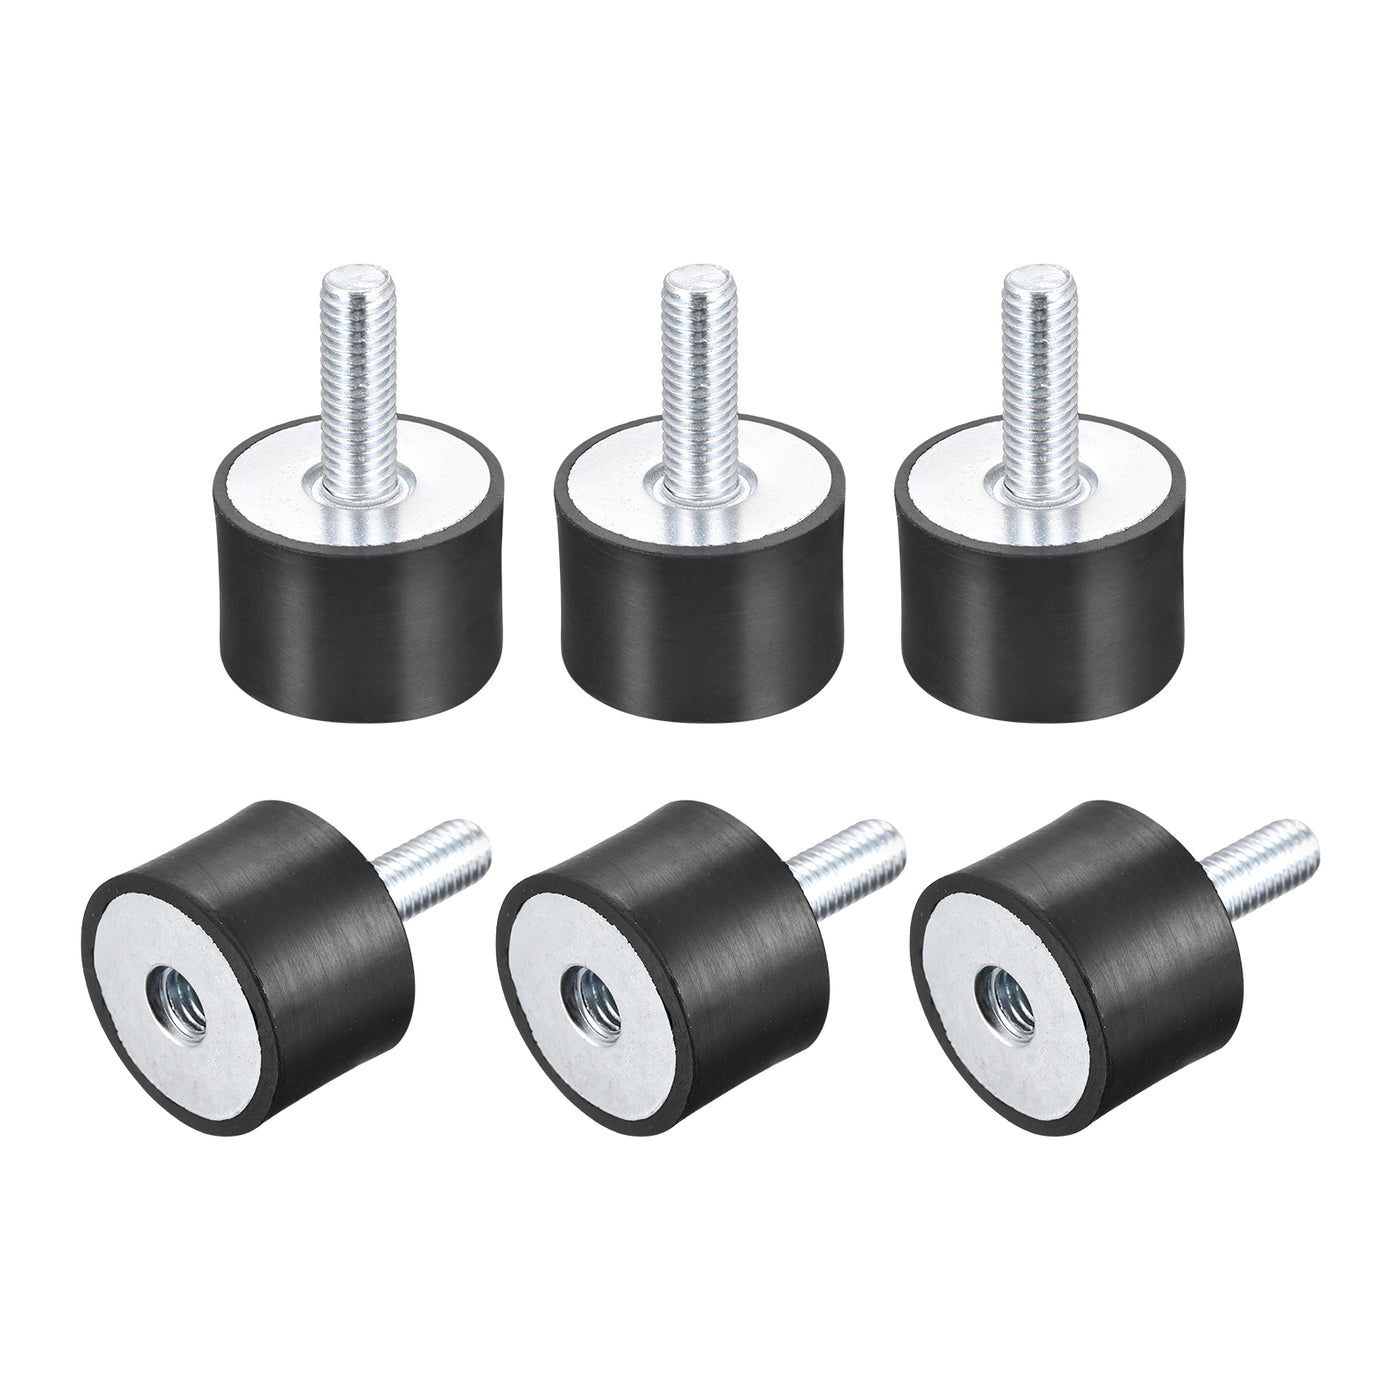 uxcell Uxcell Rubber Mount 6pcs M8 Male/Female Vibration Isolator Shock Absorber D30mmxH20mm